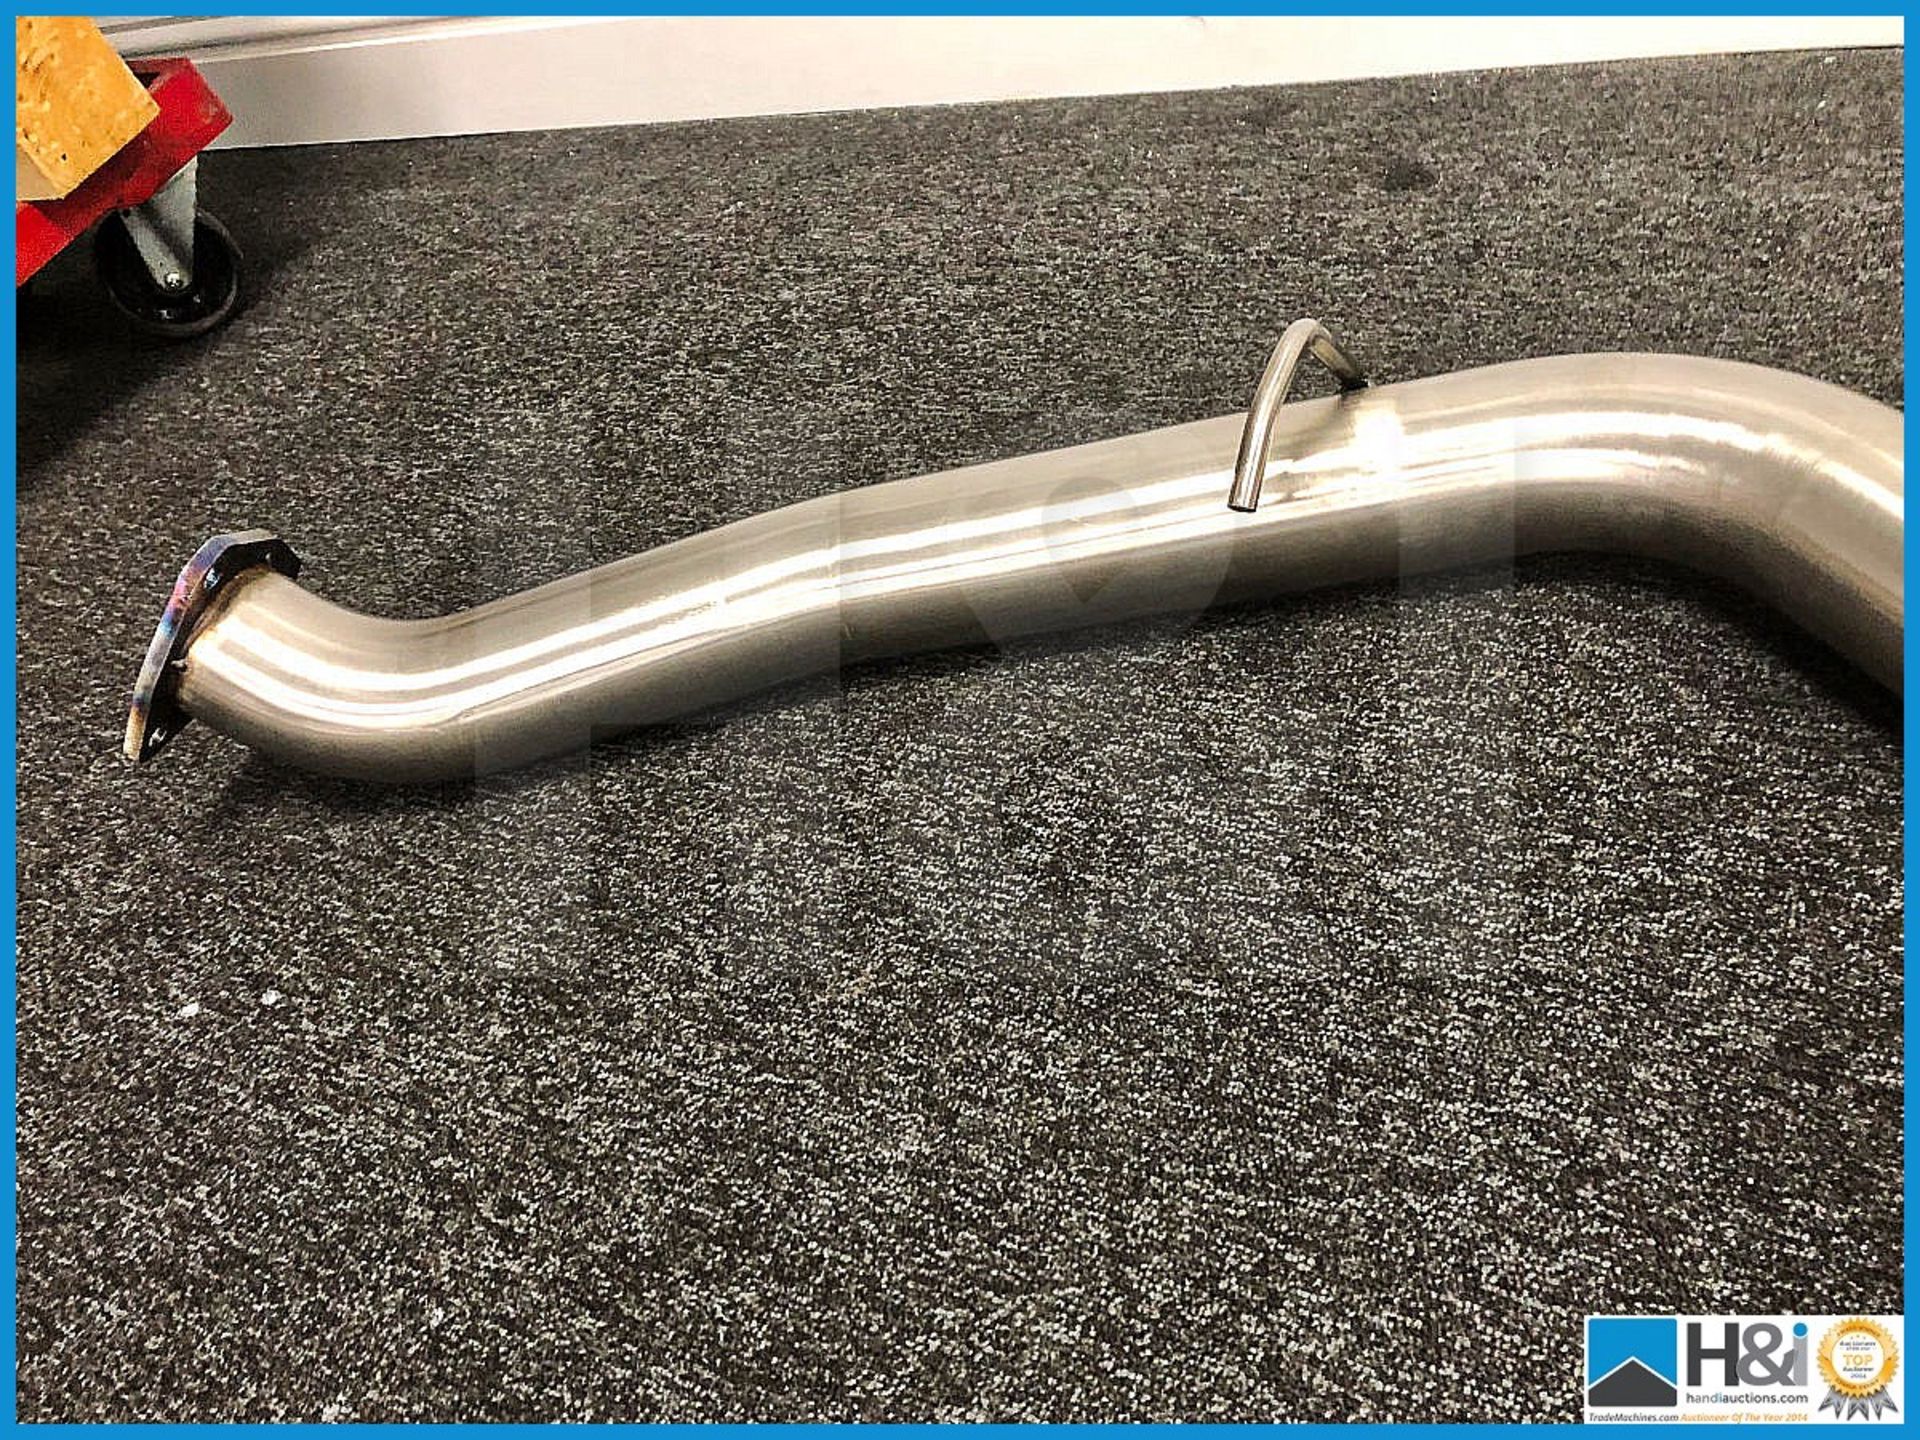 1 x Cosworth Subaru CS400 exhaust down section with cat. Last remaining - Image 2 of 6